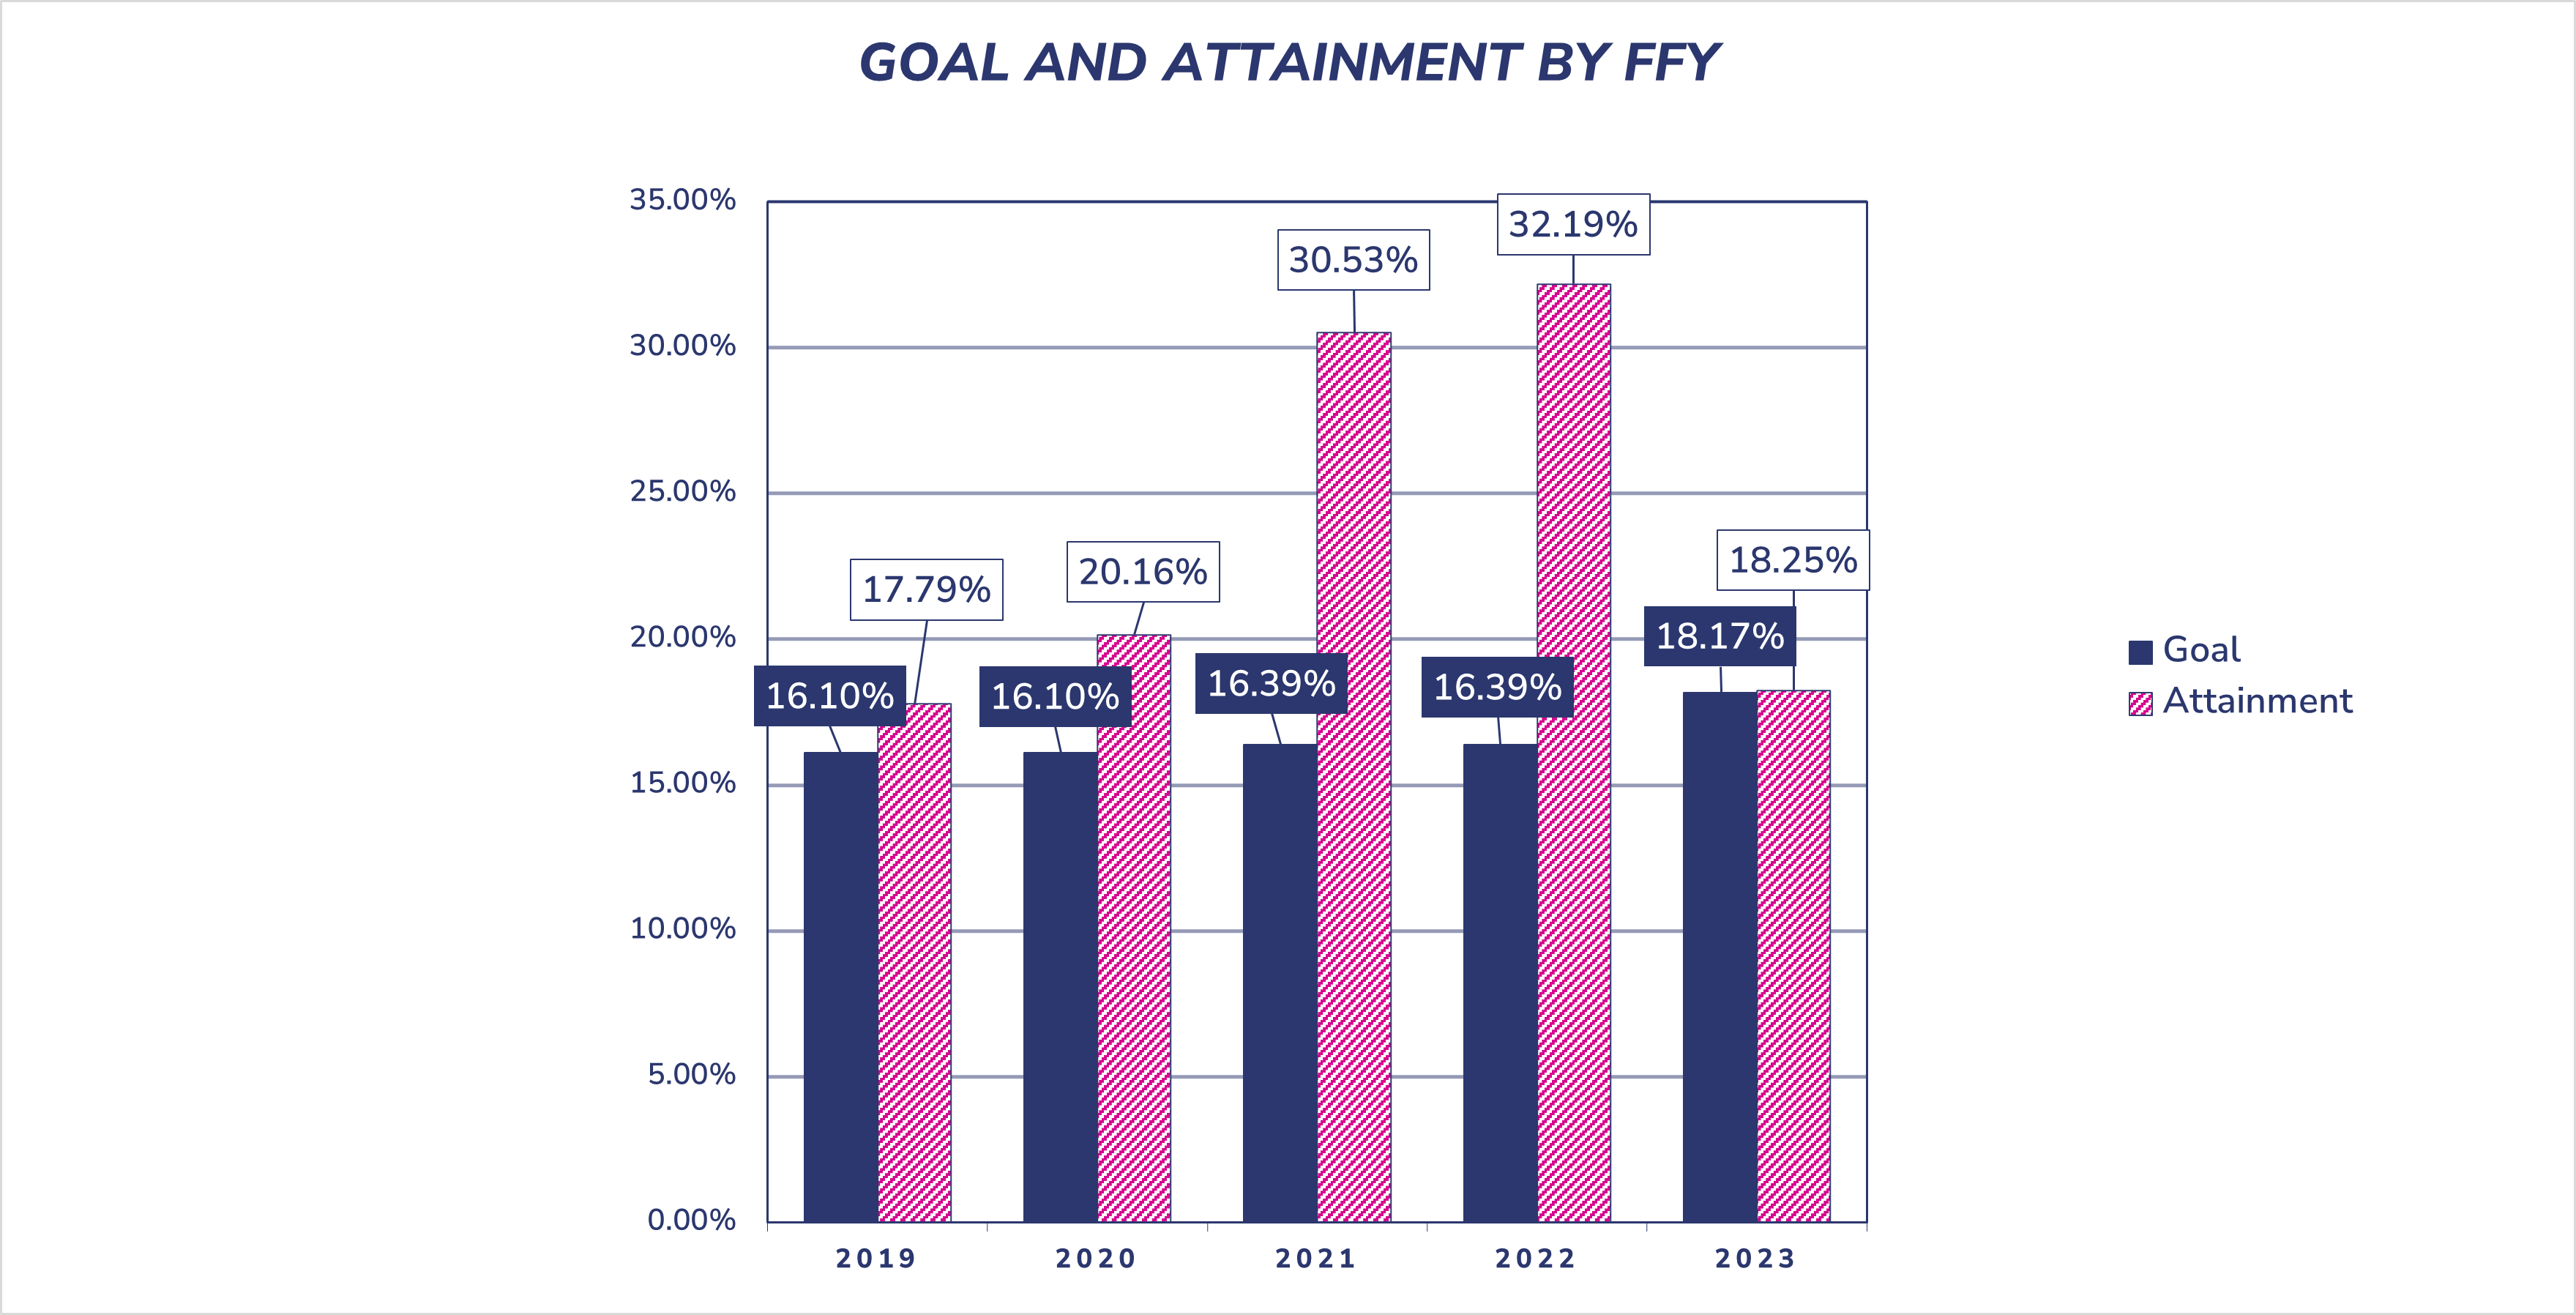 Bar chart depicting goal and obtainment data by FFY. Data represented in this chart can be found in the table below.